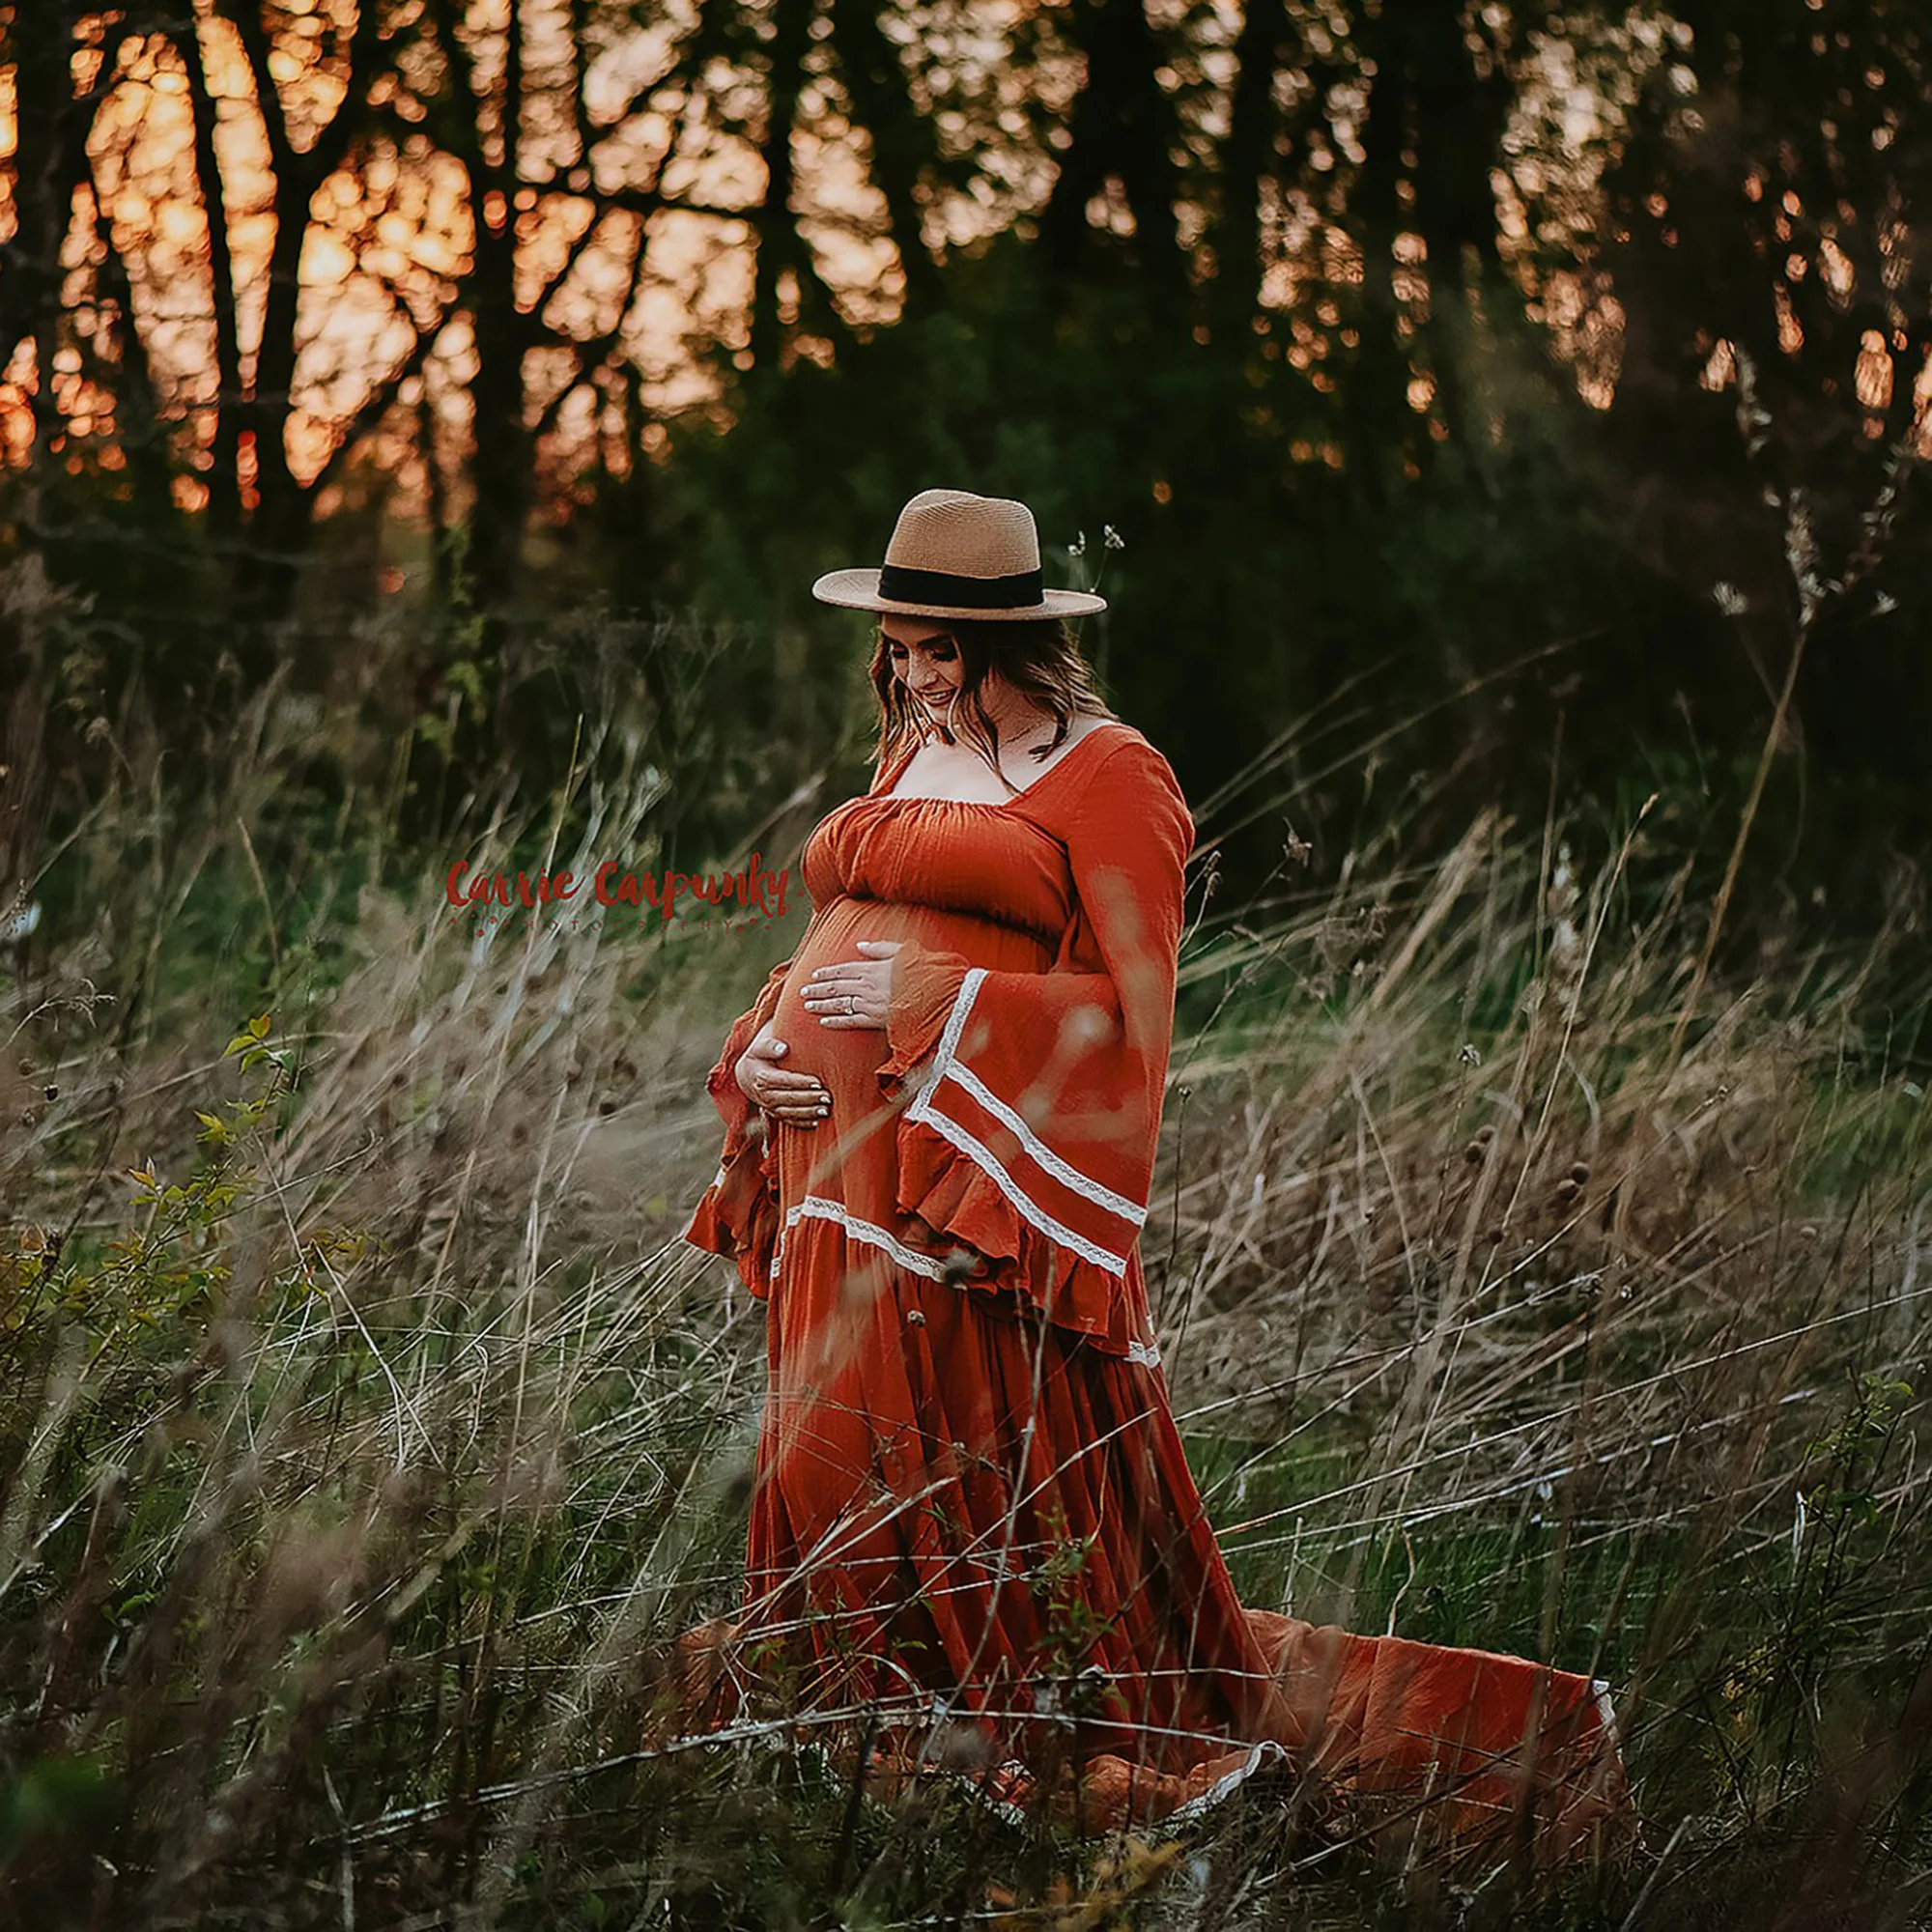 Boho Cotton Photo Shoot Pregnant Robe Maternity Dresses Maxi Kaftan Evening Party Costume for Women Photography Accessories cotton premama photography dresses props 2022 new boho maternity pregnant gown baby shower photo shoot wedding dress accessories